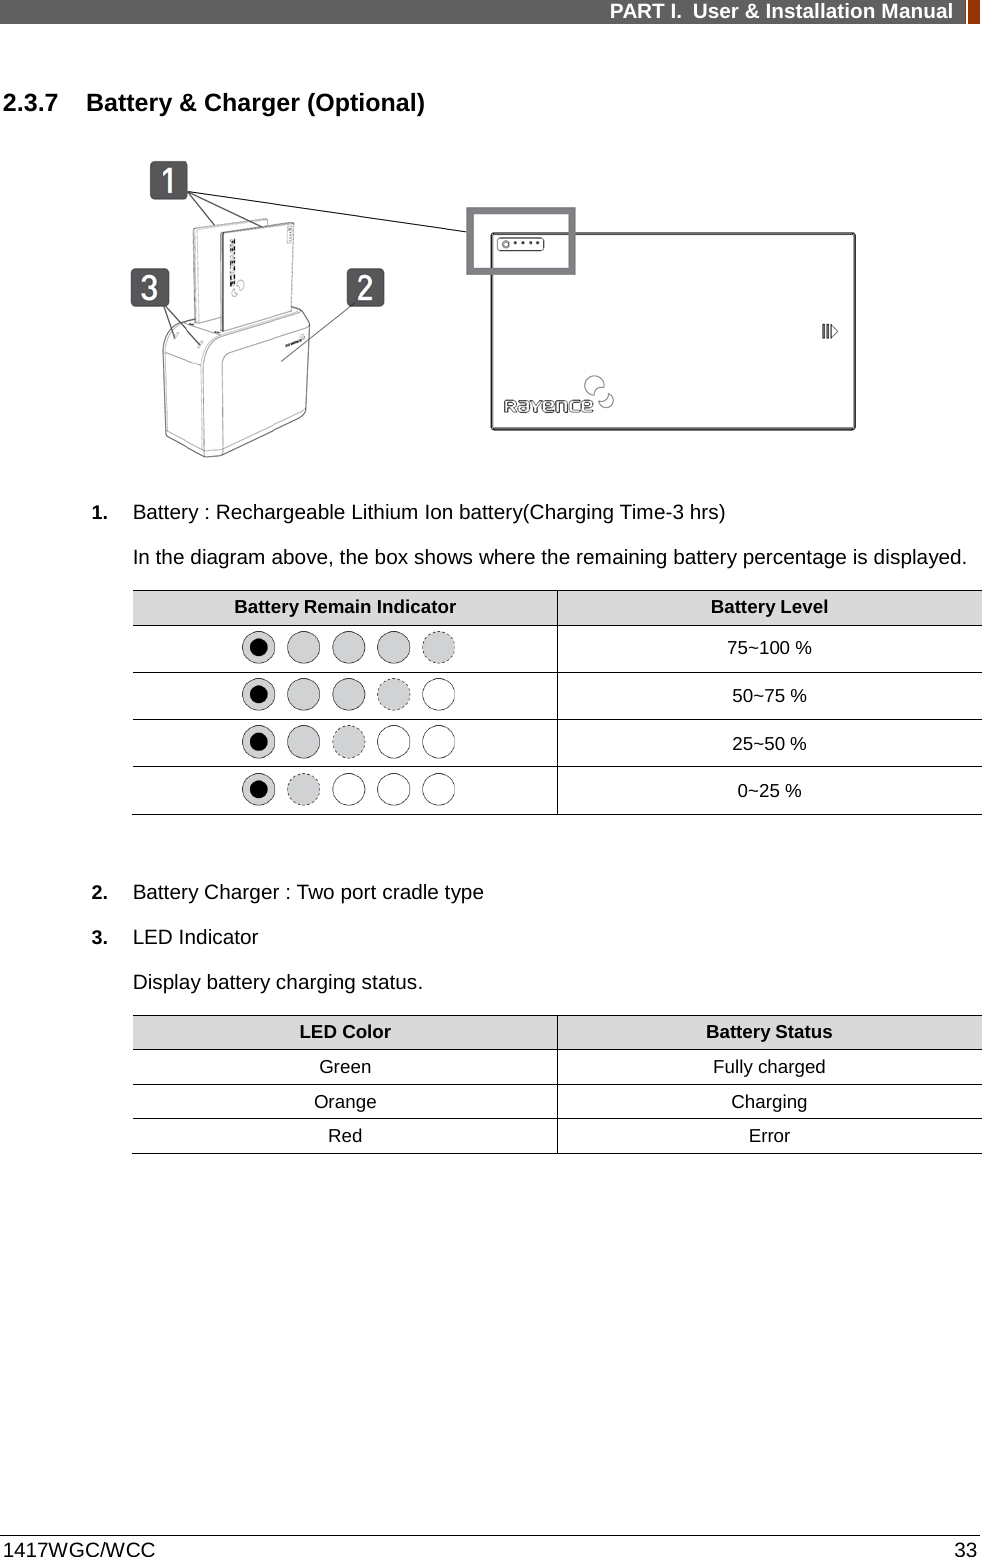 PART I. User &amp; Installation Manual  1417WGC/WCC 33 2.3.7 Battery &amp; Charger (Optional)  1. Battery : Rechargeable Lithium Ion battery(Charging Time-3 hrs) In the diagram above, the box shows where the remaining battery percentage is displayed. Battery Remain Indicator Battery Level  75~100 %  50~75 %  25~50 %  0~25 %  2. Battery Charger : Two port cradle type 3. LED Indicator Display battery charging status. LED Color Battery Status Green Fully charged Orange Charging Red  Error   